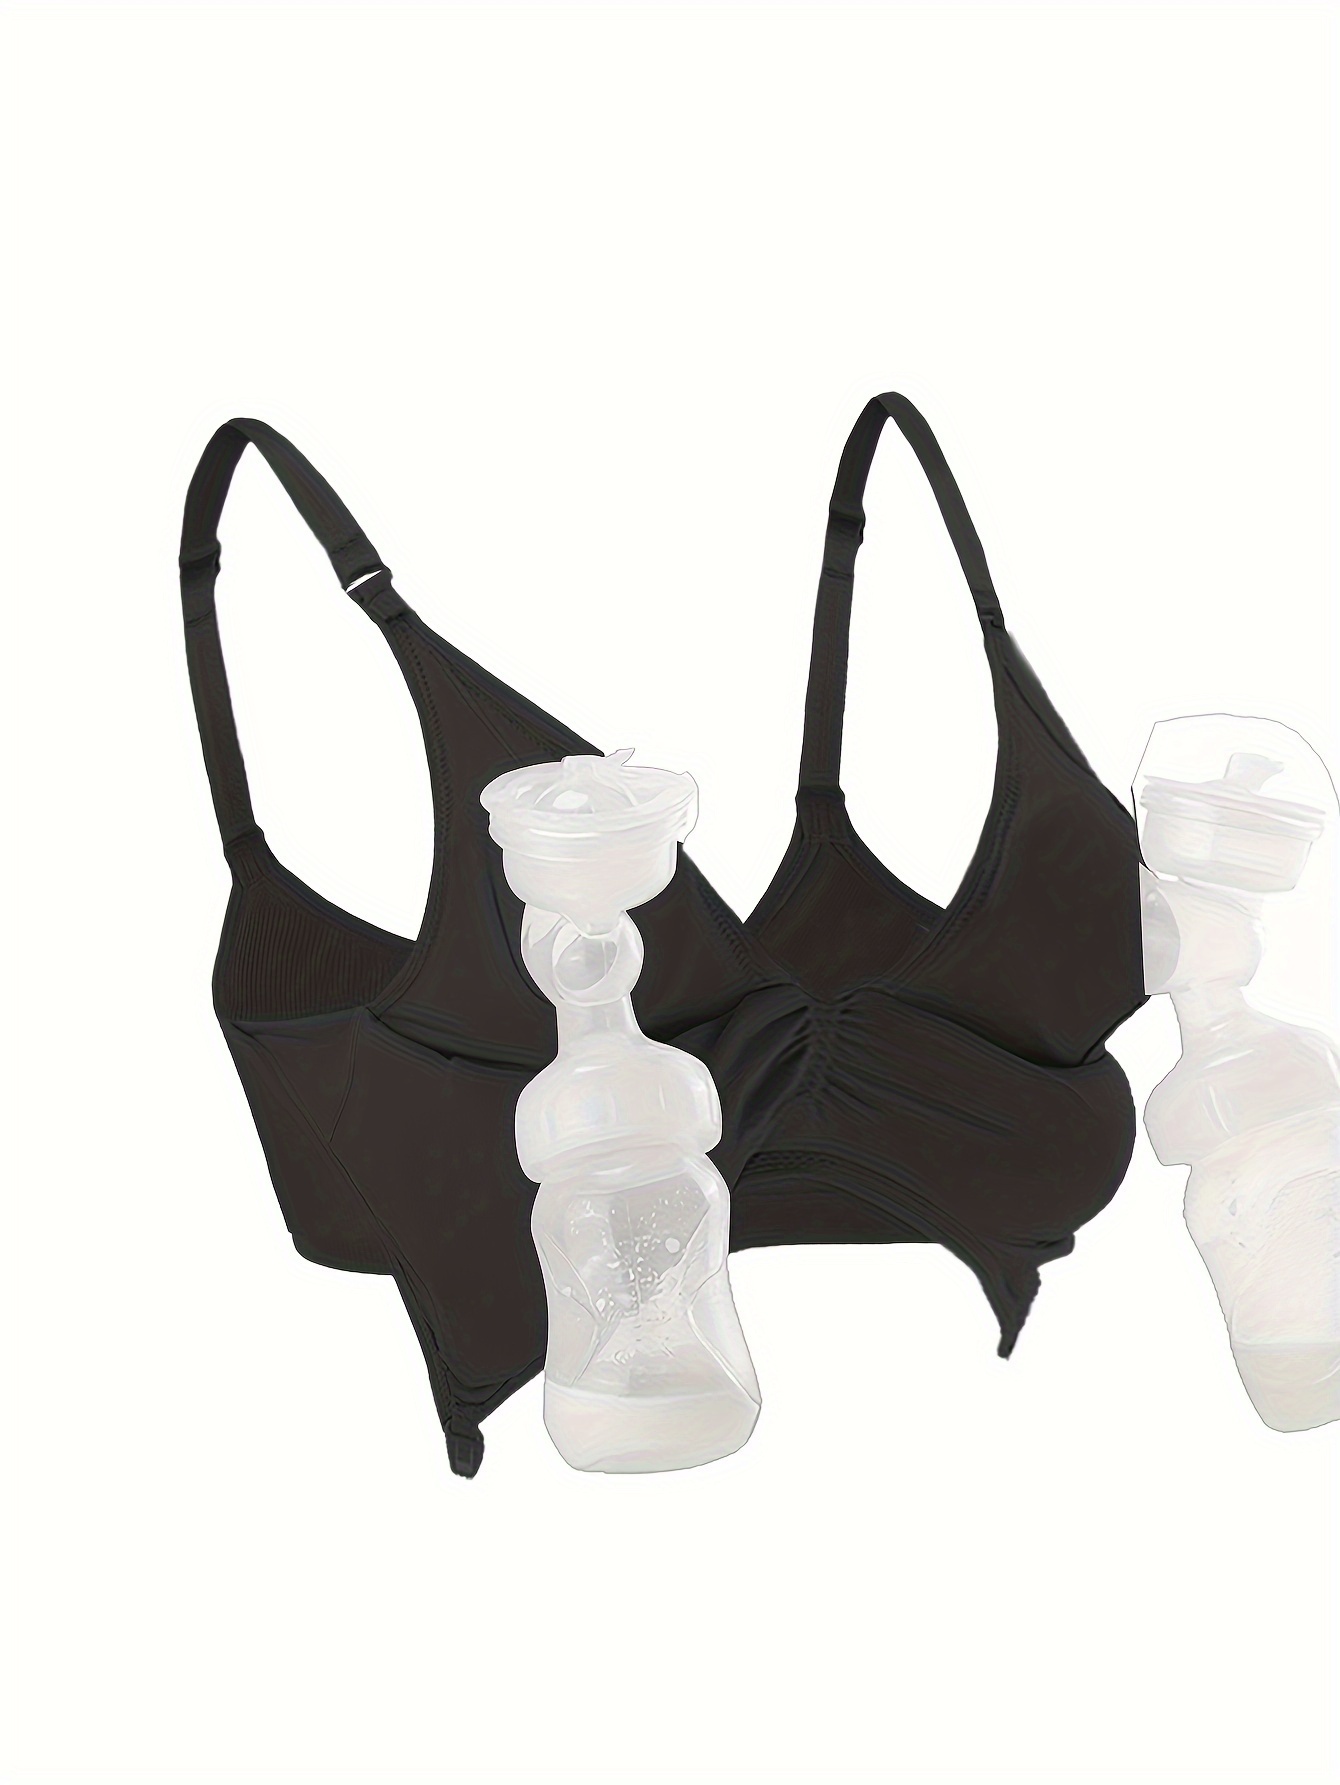 Momcozy Hands-Free Pumping Bra in Black Size XL | Cotton